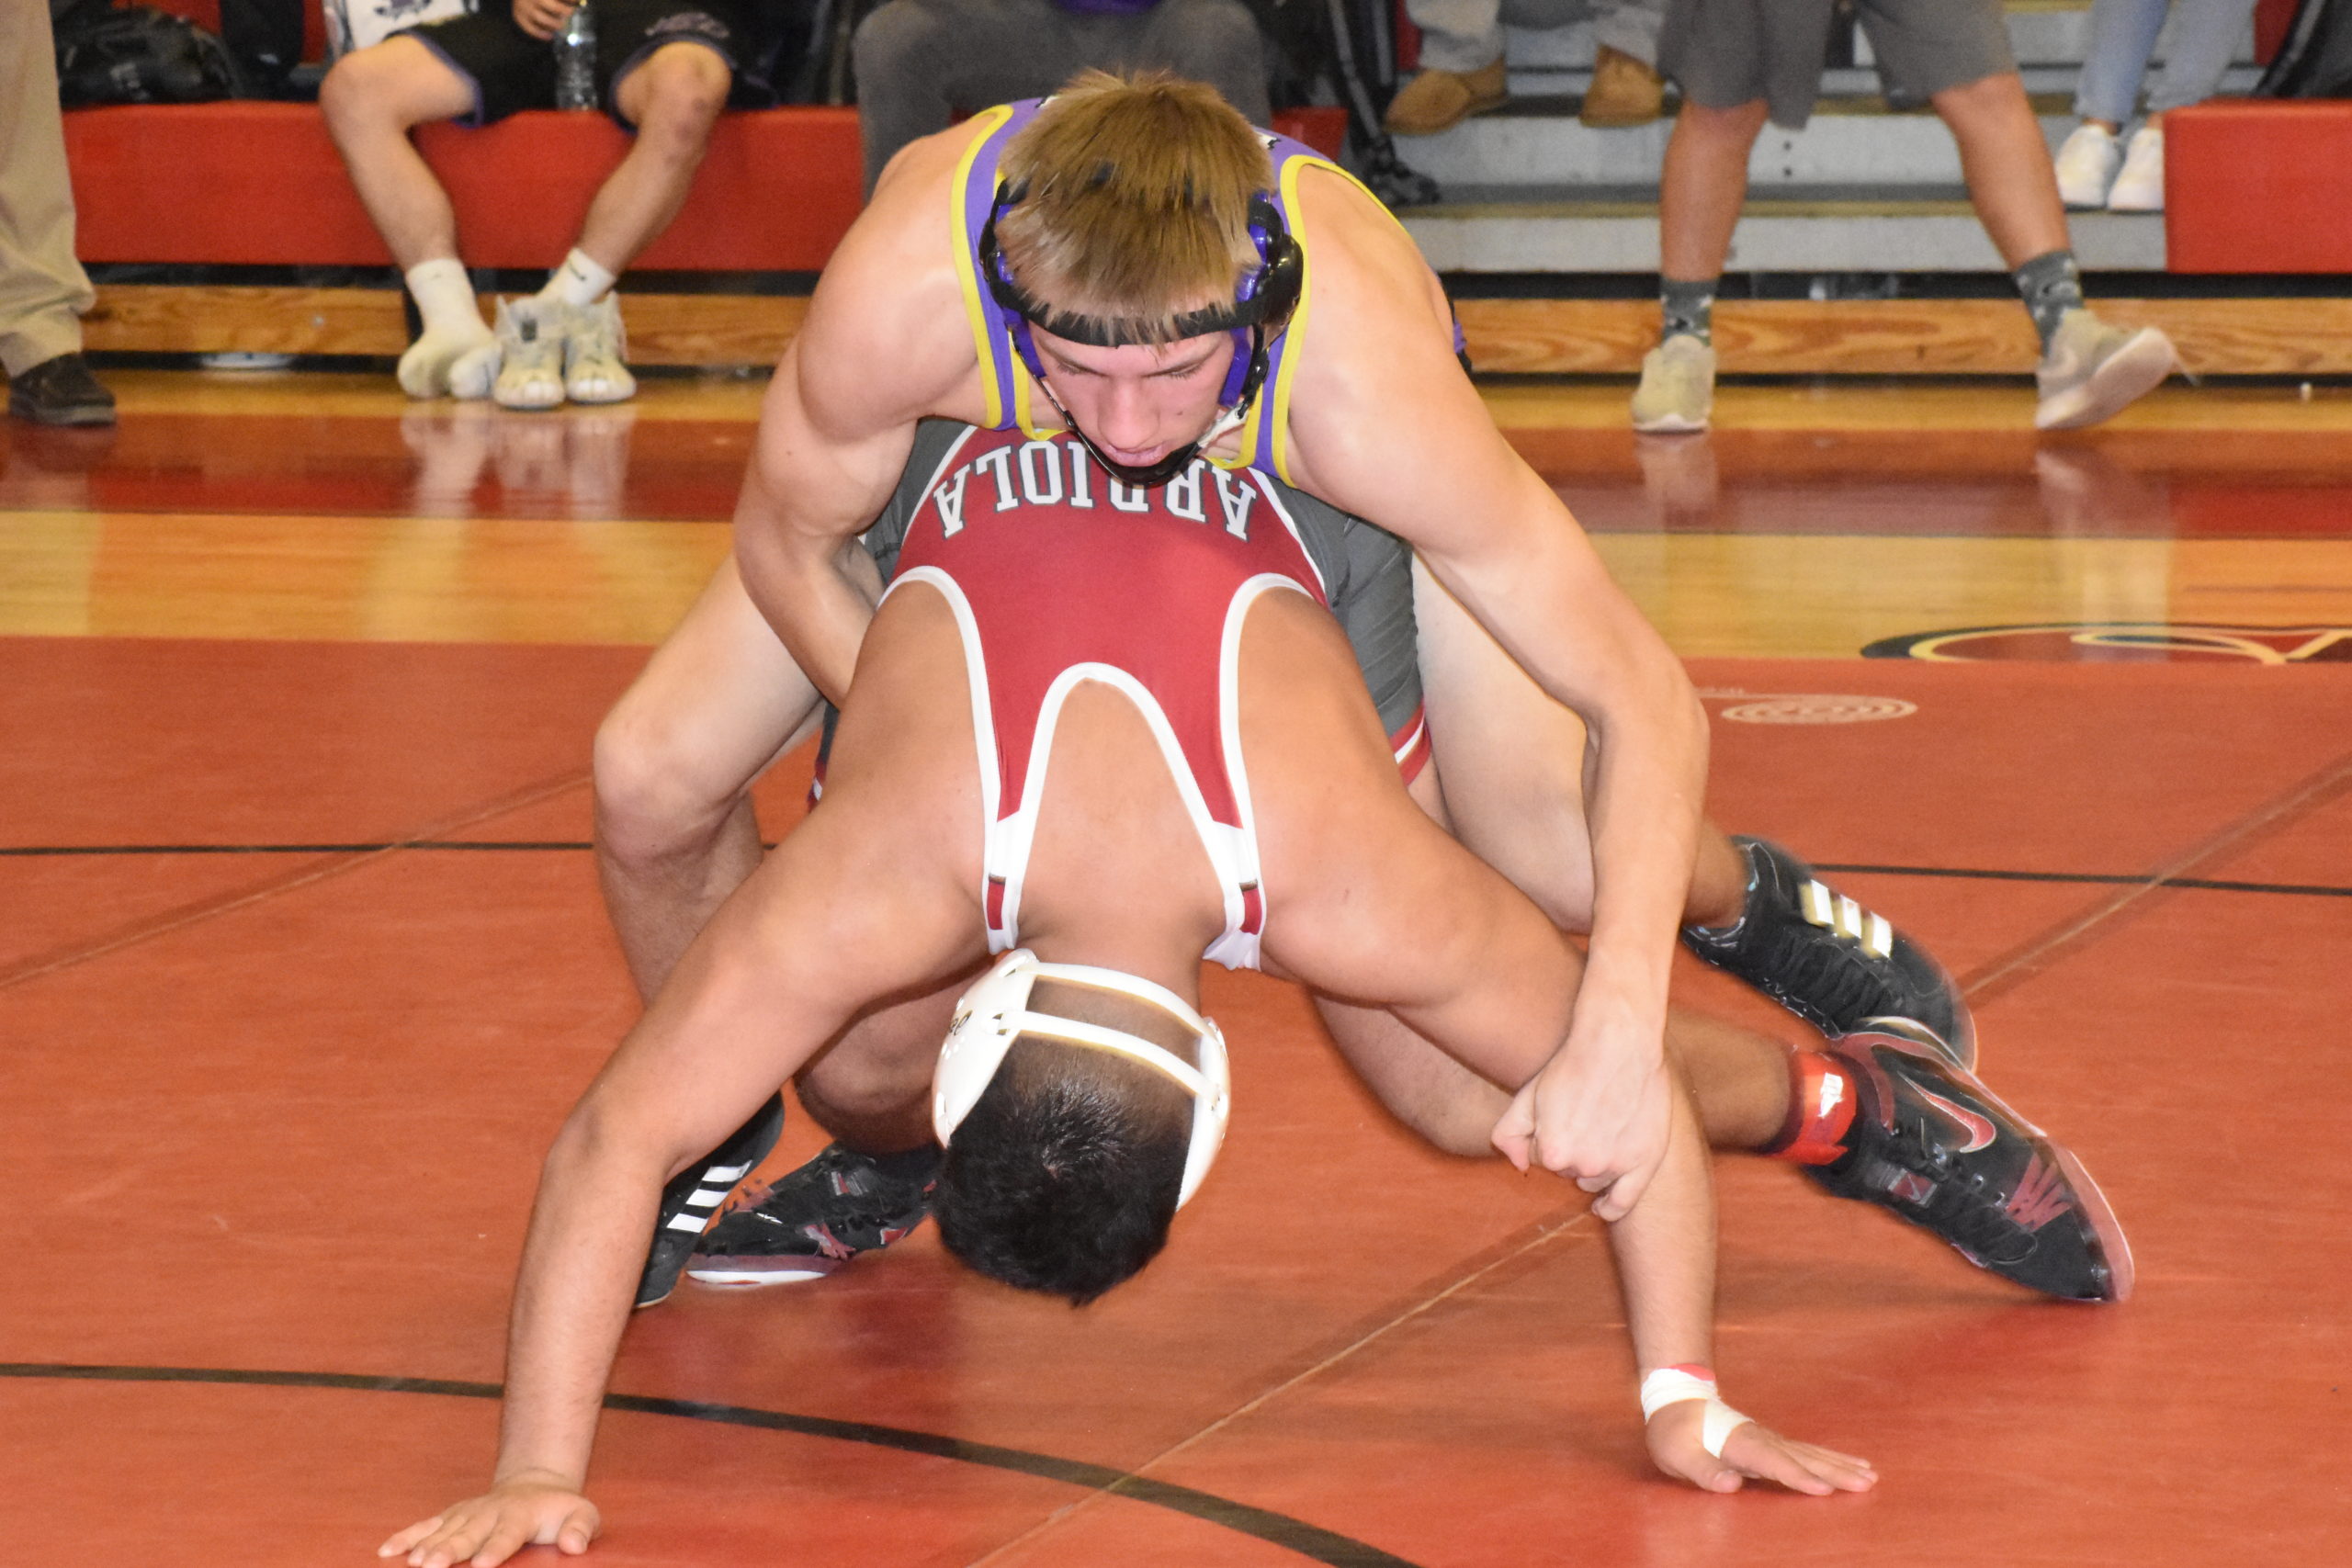 Will Krivickas of Hampton Bays gets behind Marcos Arriola of Center Moriches to score and win in sudden victory in the consolation final.